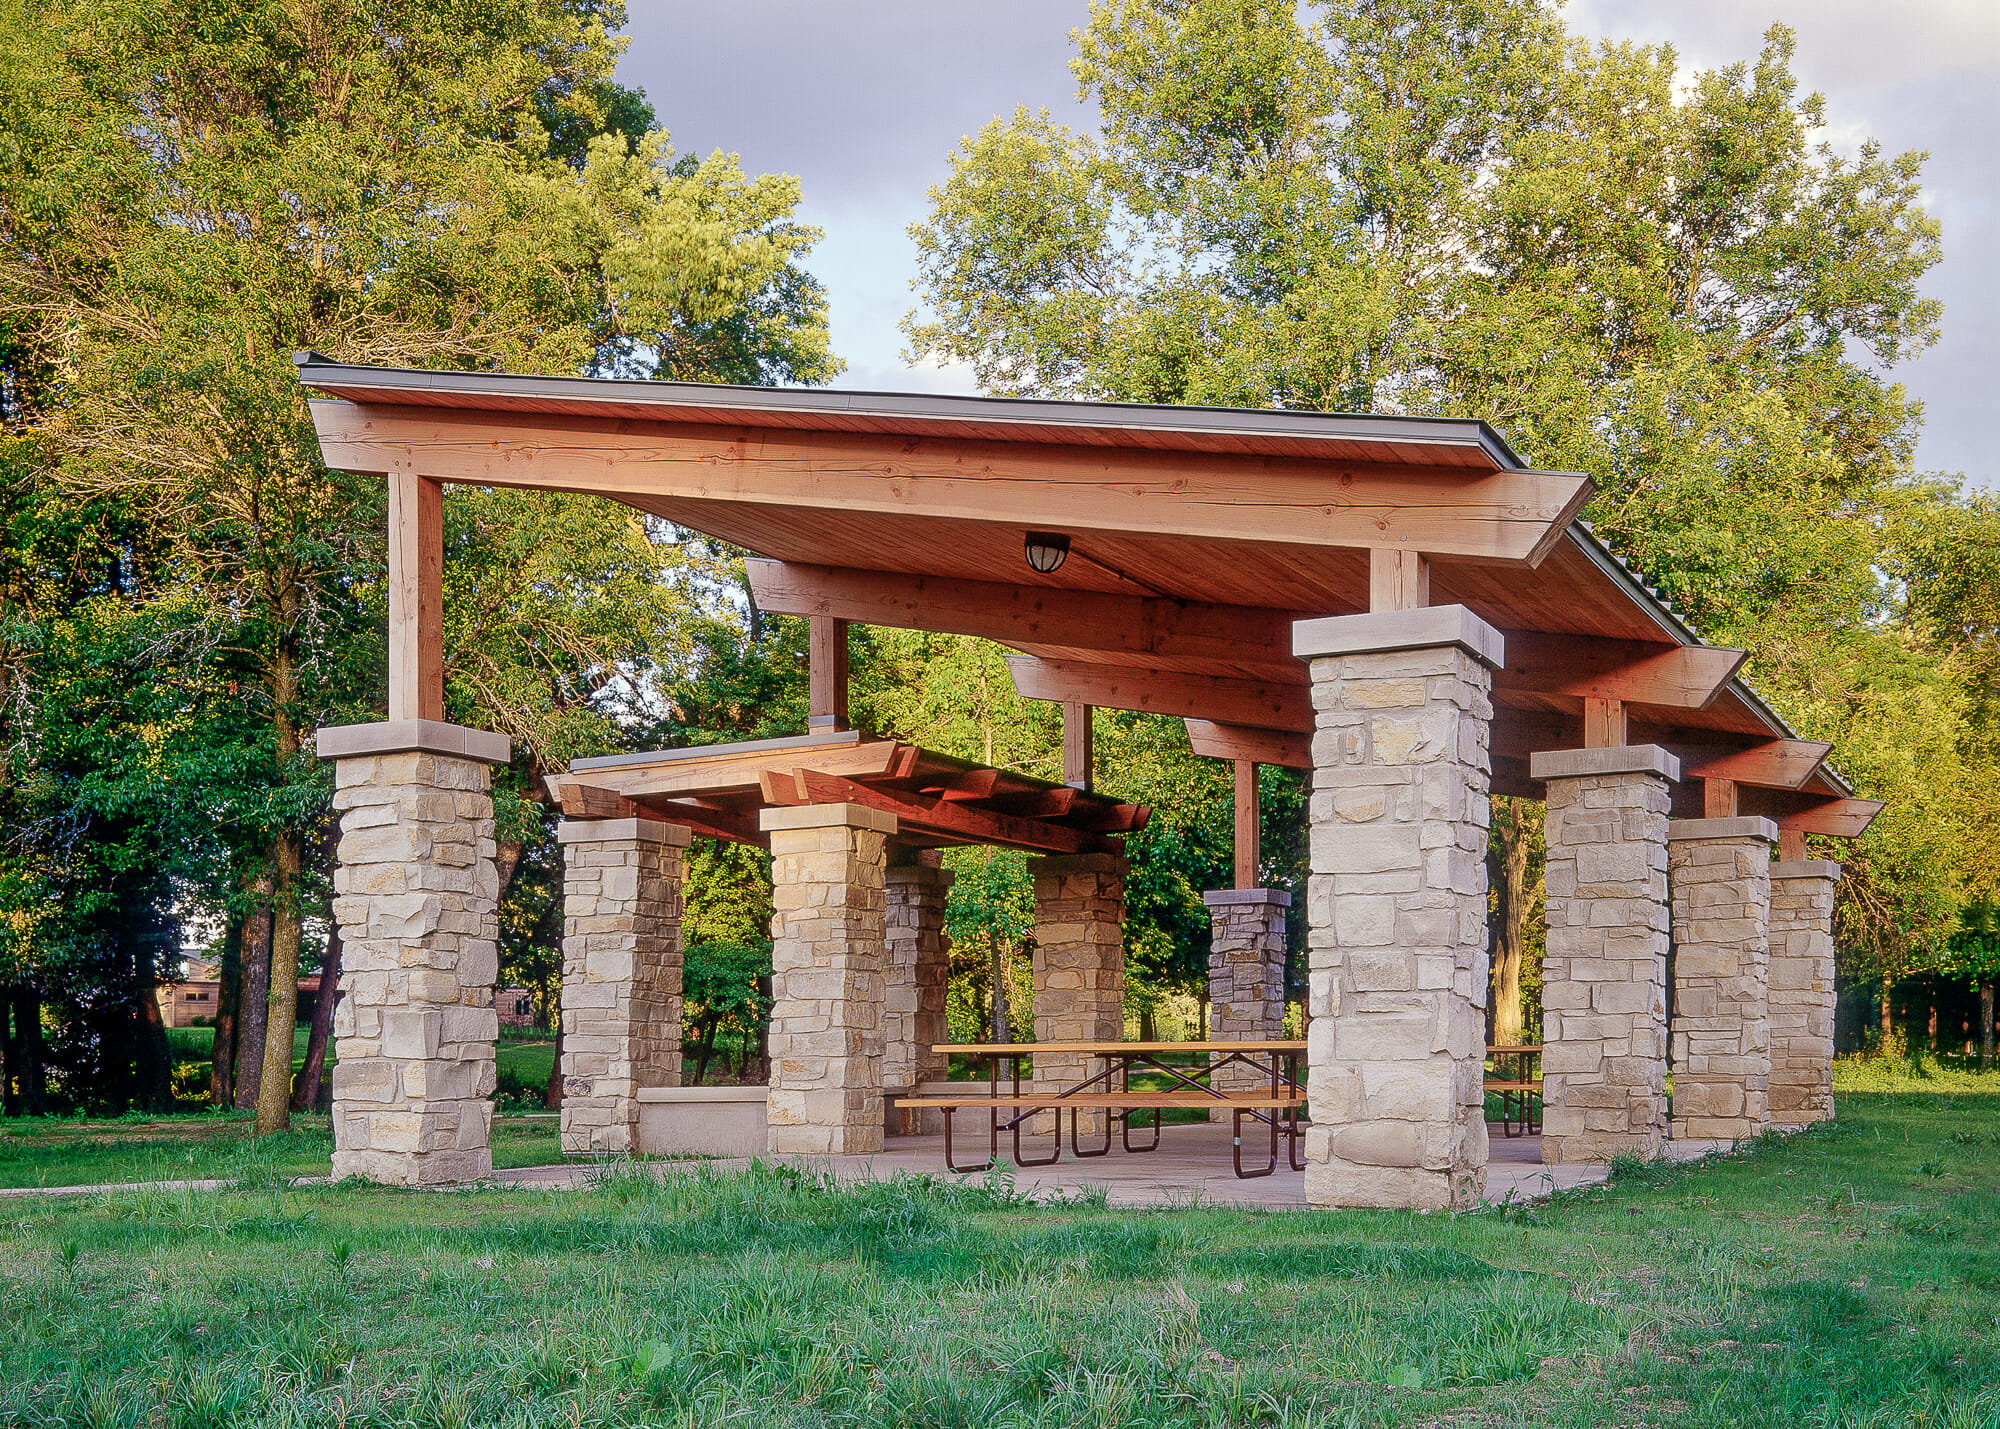 Timber Frame Picnic Shelter with stone post bases at Citizen's Park in Barrington, Illinois